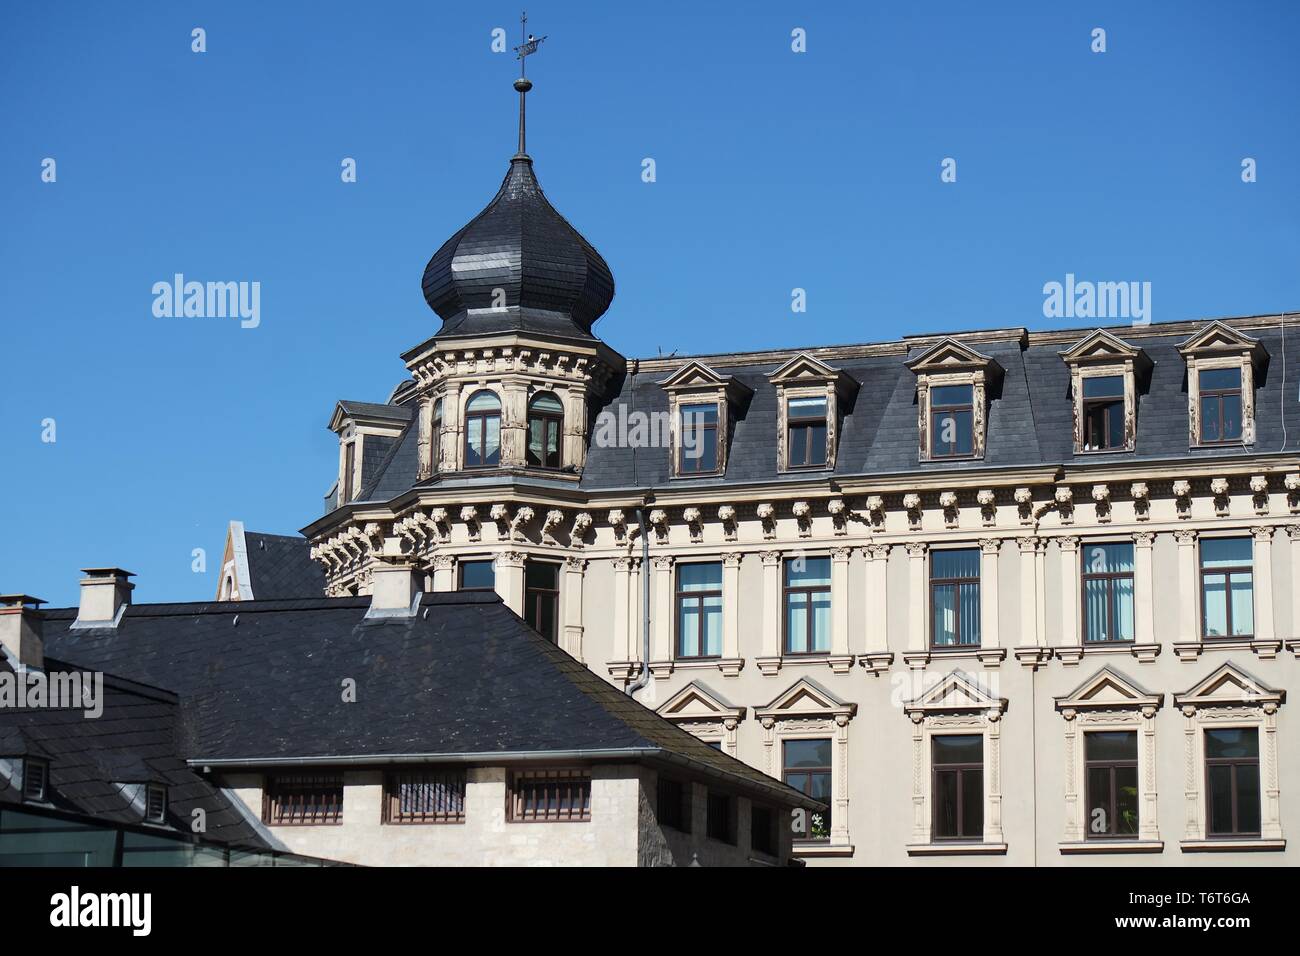 House with slate roof and onion dome Stock Photo